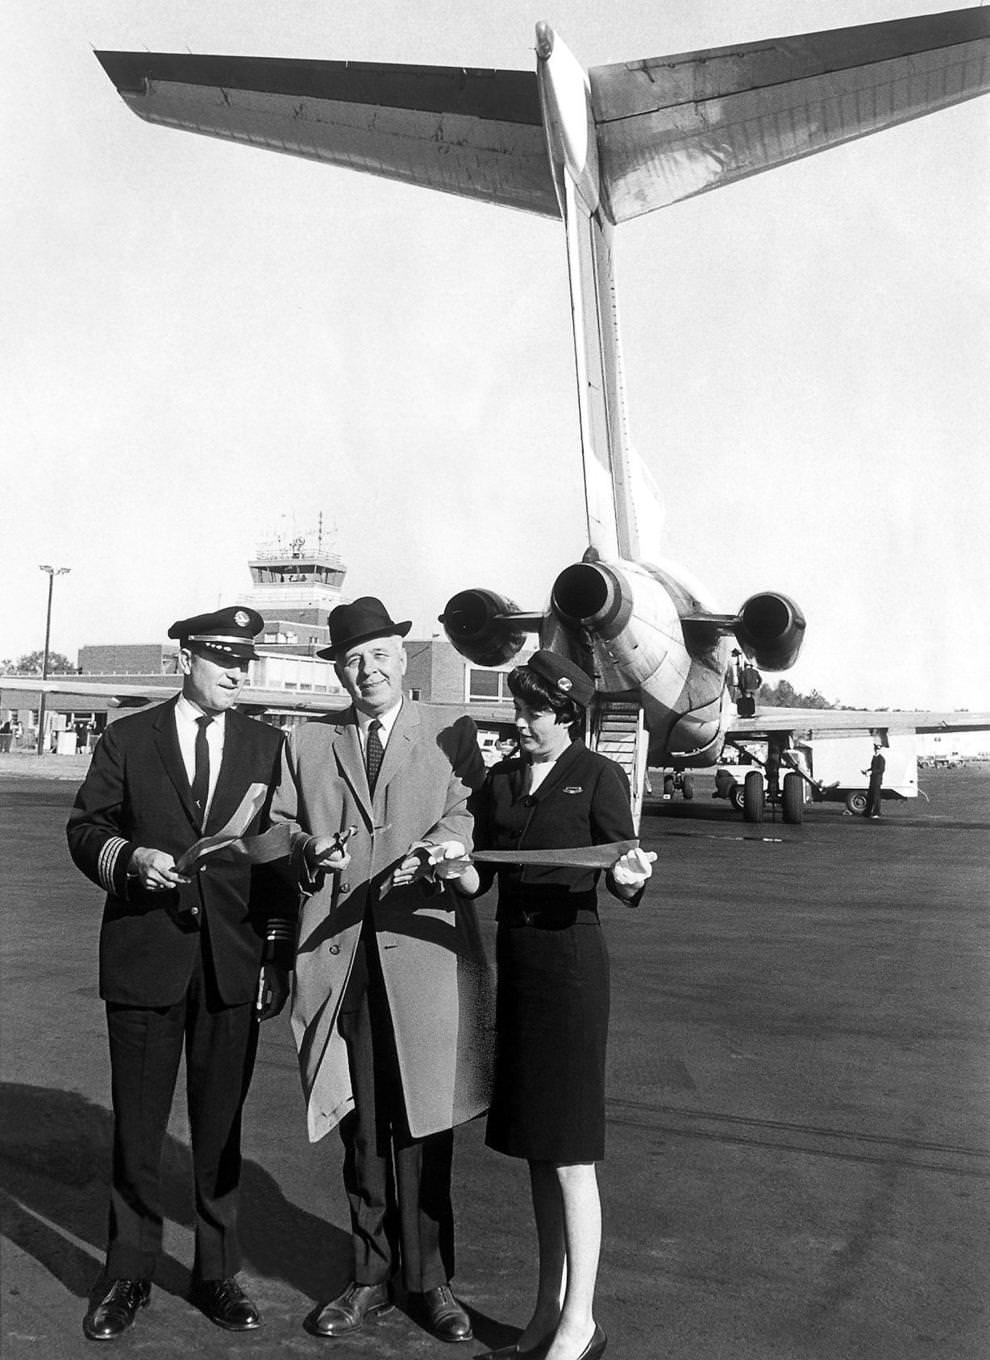 Richmond Mayor Morrill M. Crowe cut a ceremonial ribbon to mark the inauguration of the Eastern Airlines passenger service from Byrd Field to New York, 1965.